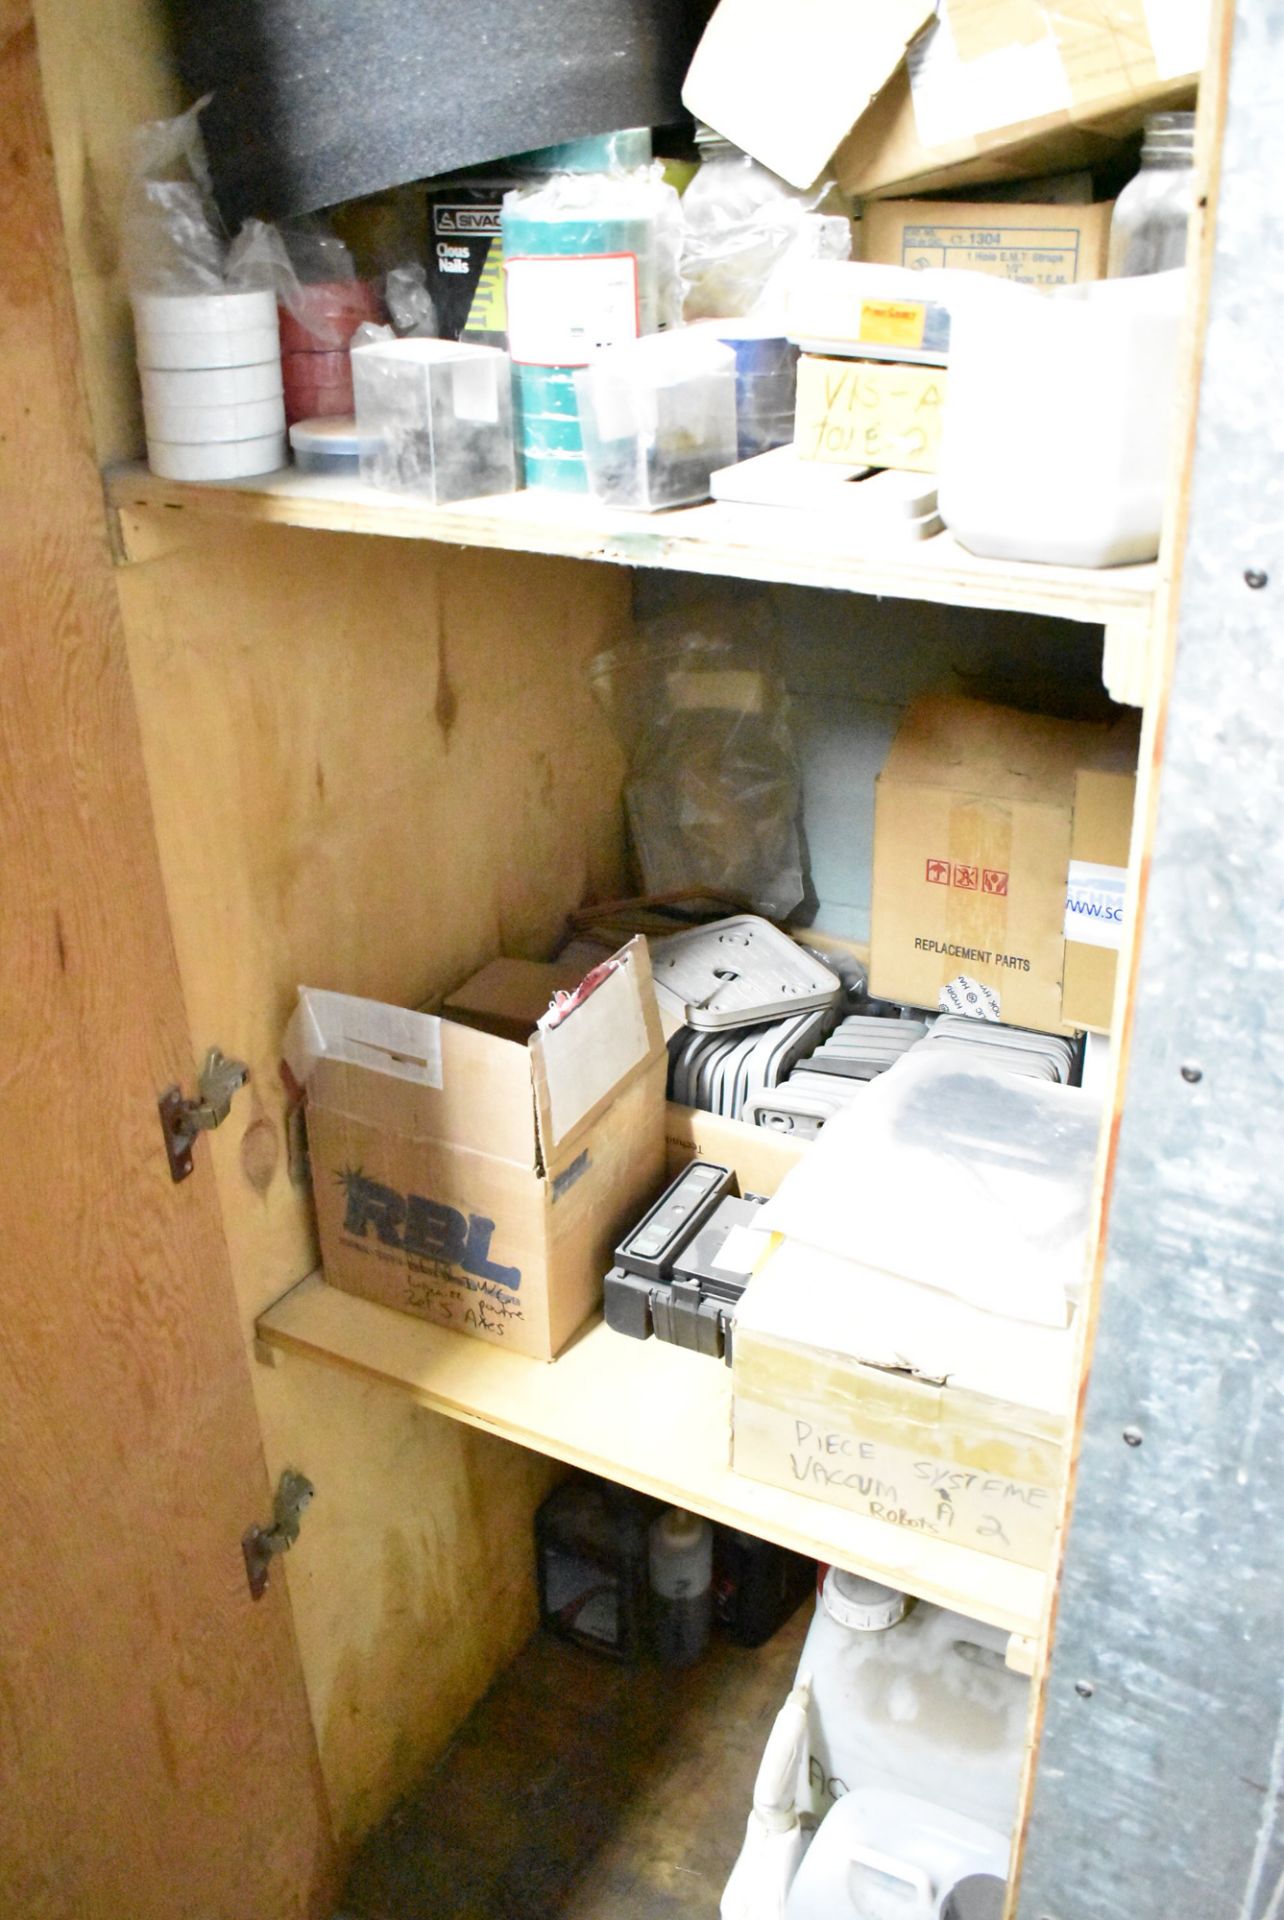 LOT/ STORAGE CABINETS WITH CONTENTS - SHOP SUPPLIES, CHEMICALS, HARDWARE, ELECTRICAL COMPONENTS, - Image 4 of 7